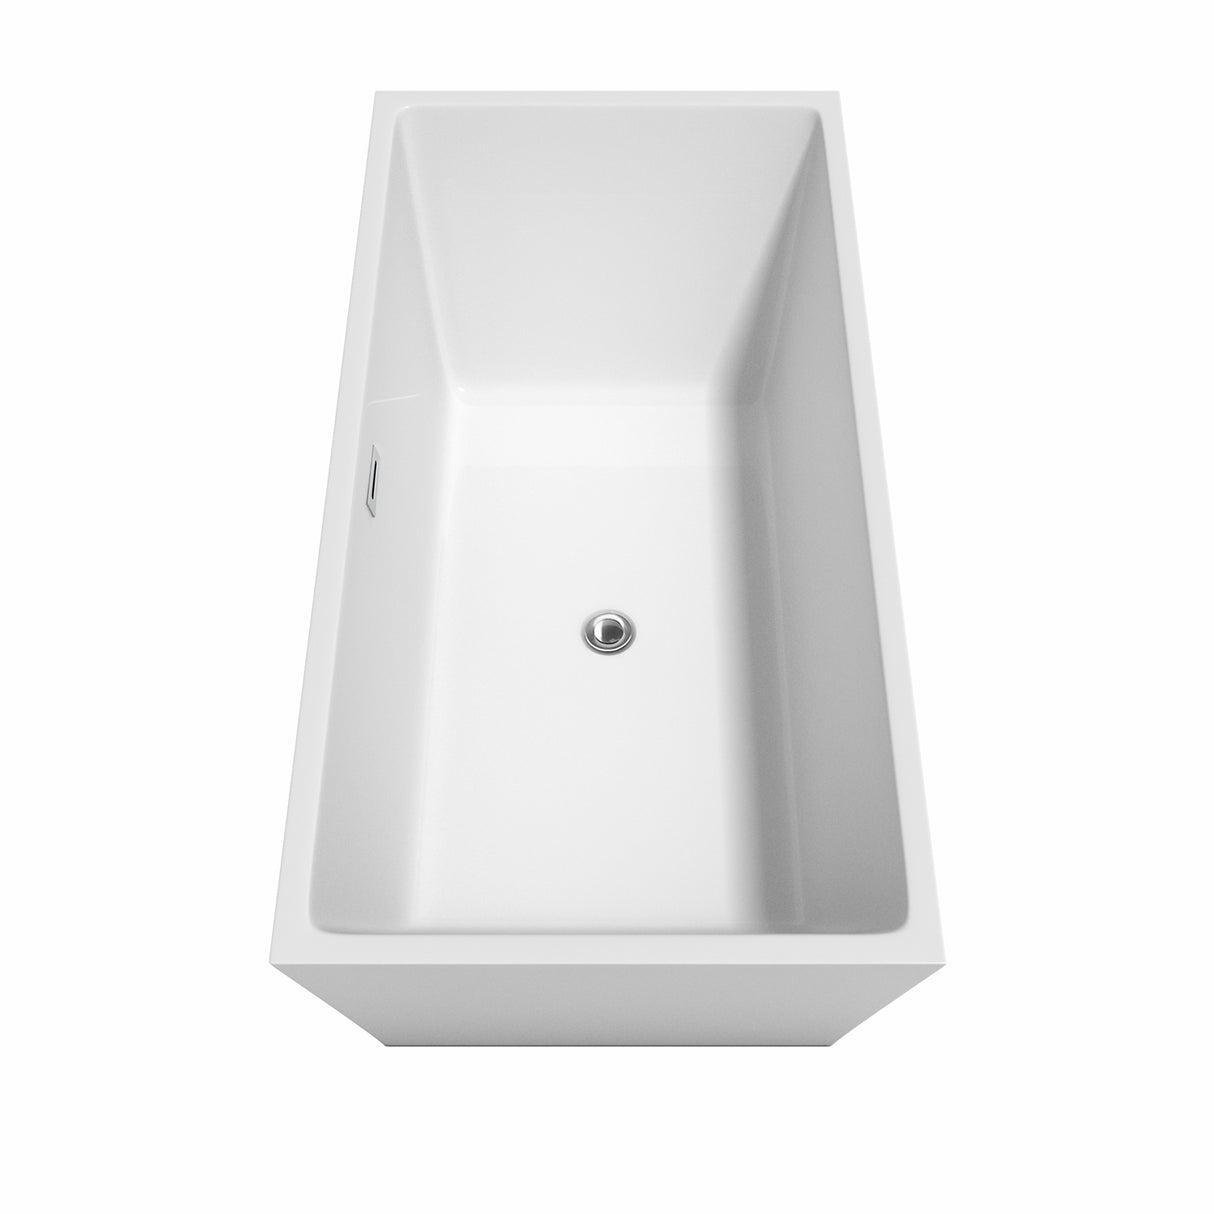 Sara 63 Inch Freestanding Bathtub in White with Polished Chrome Trim and Floor Mounted Faucet in Brushed Gold